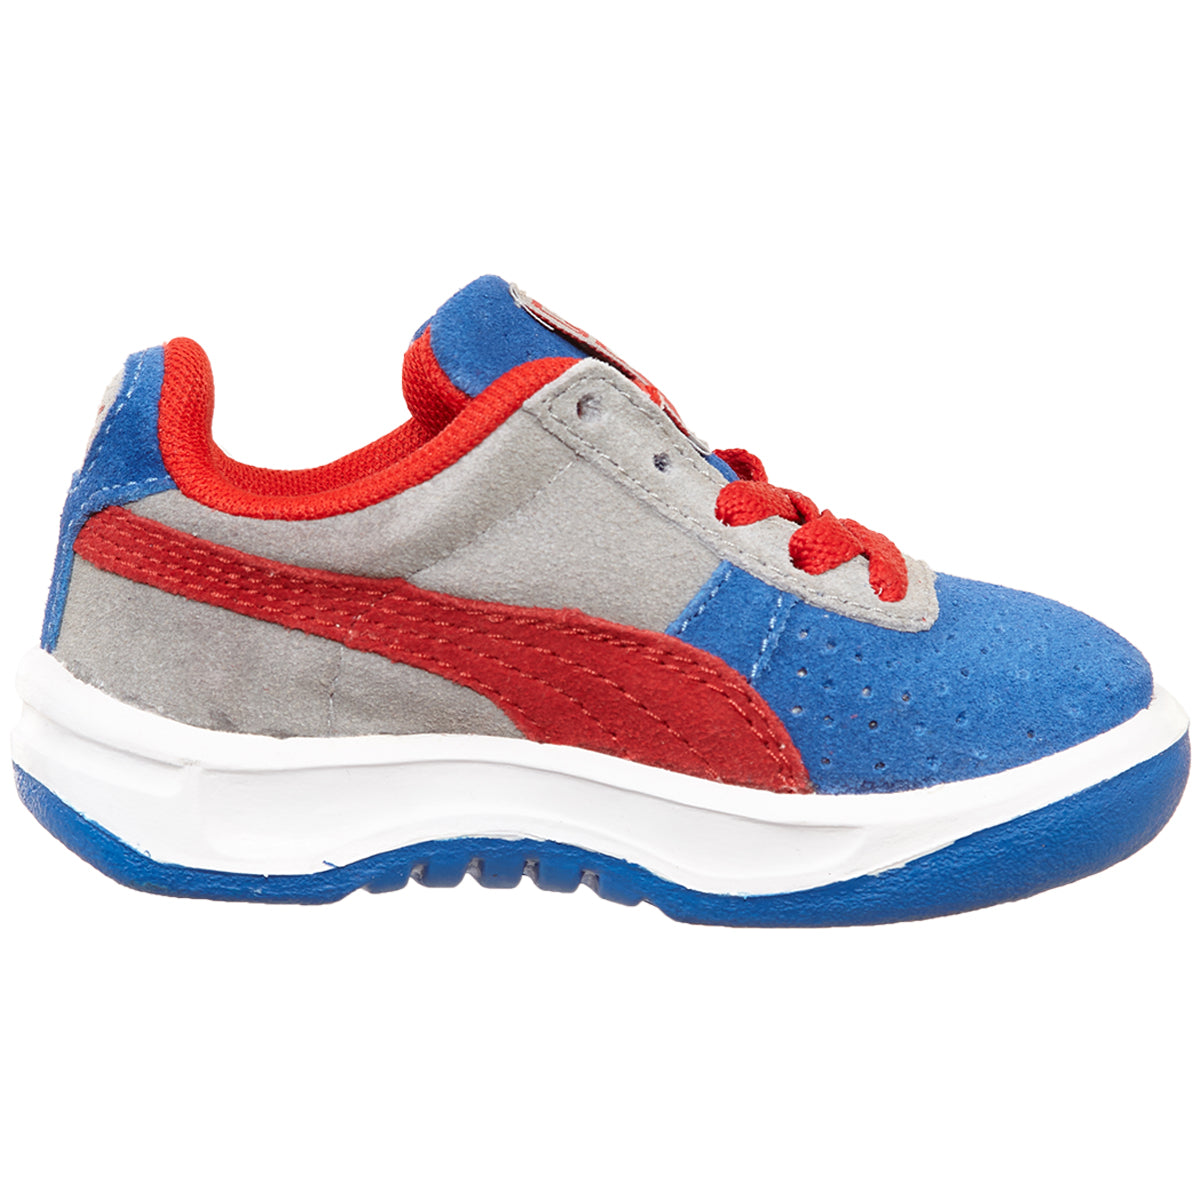 Puma Gv Special Nm Toddlers Style : 358333